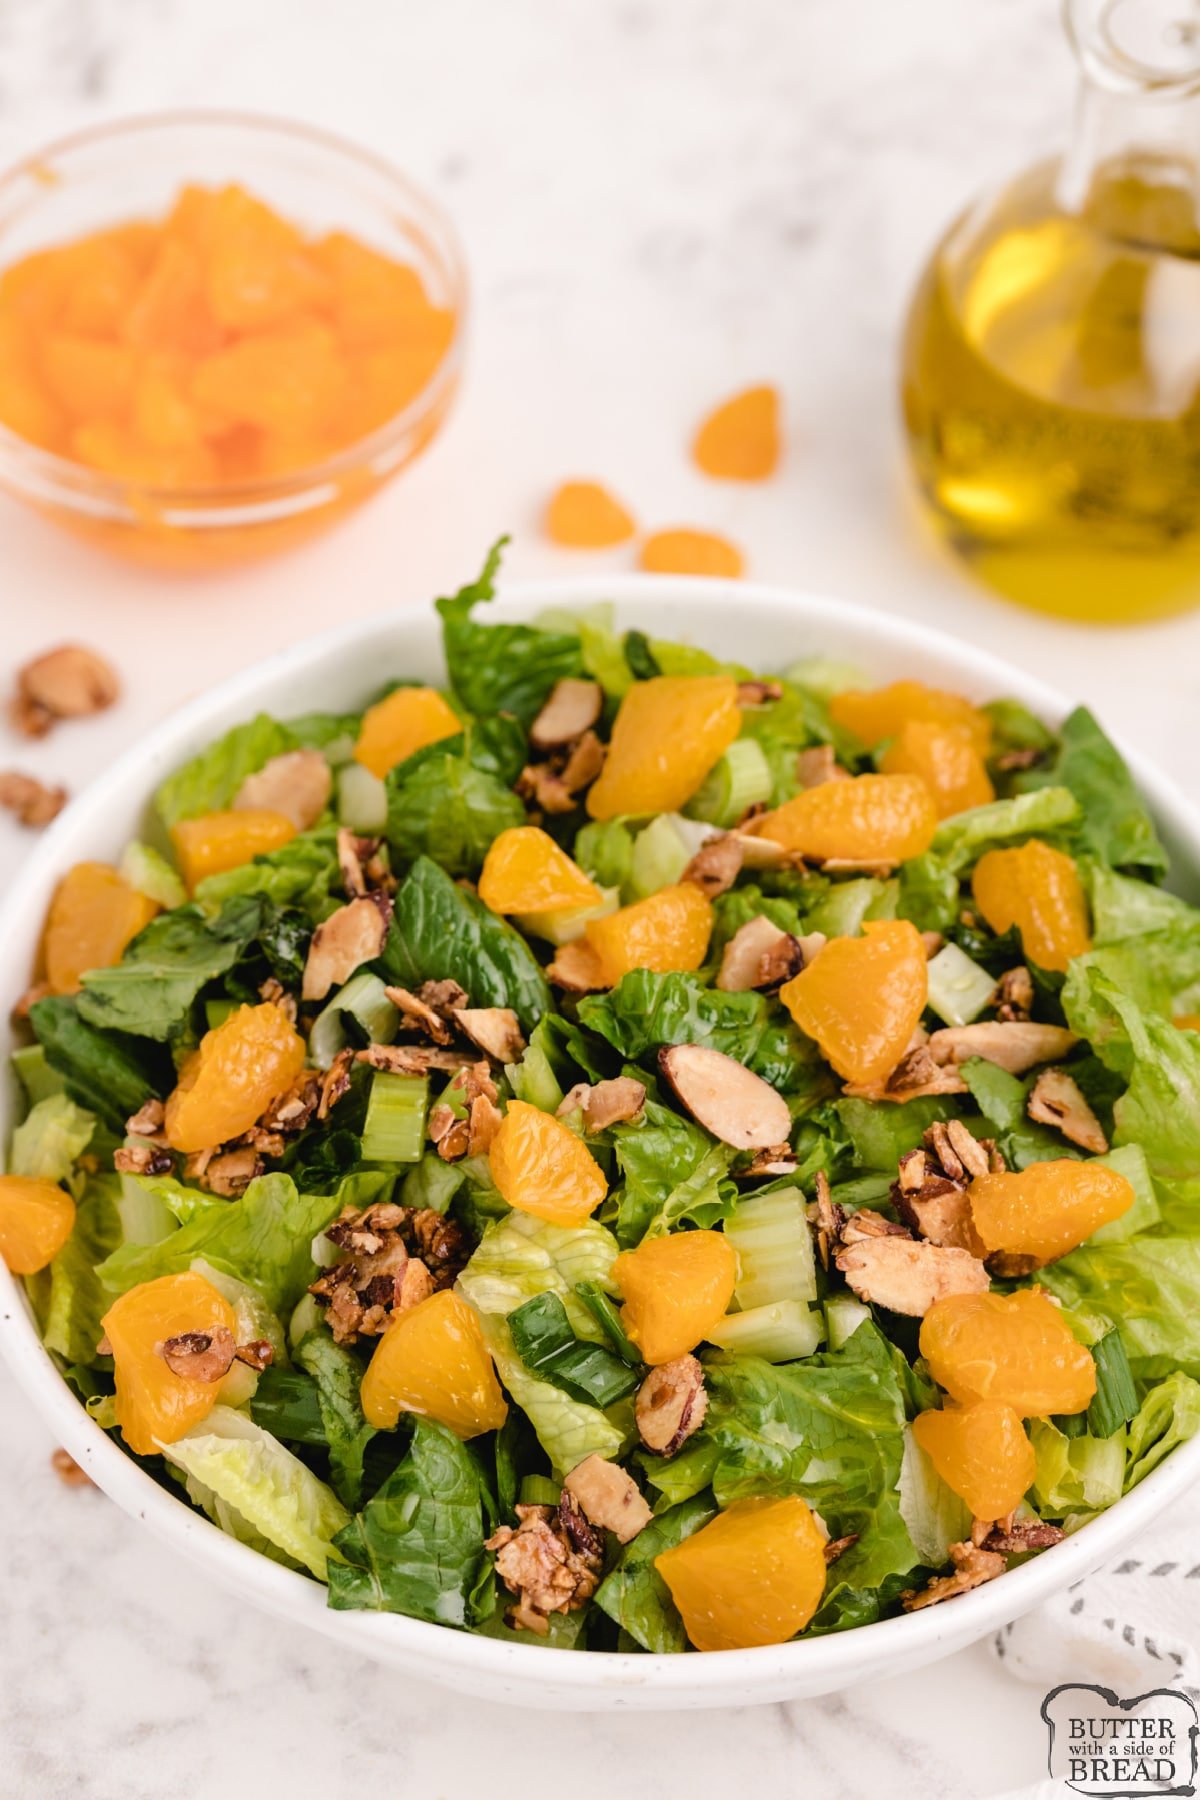 Salad made with mandarin oranges and sliced almonds 